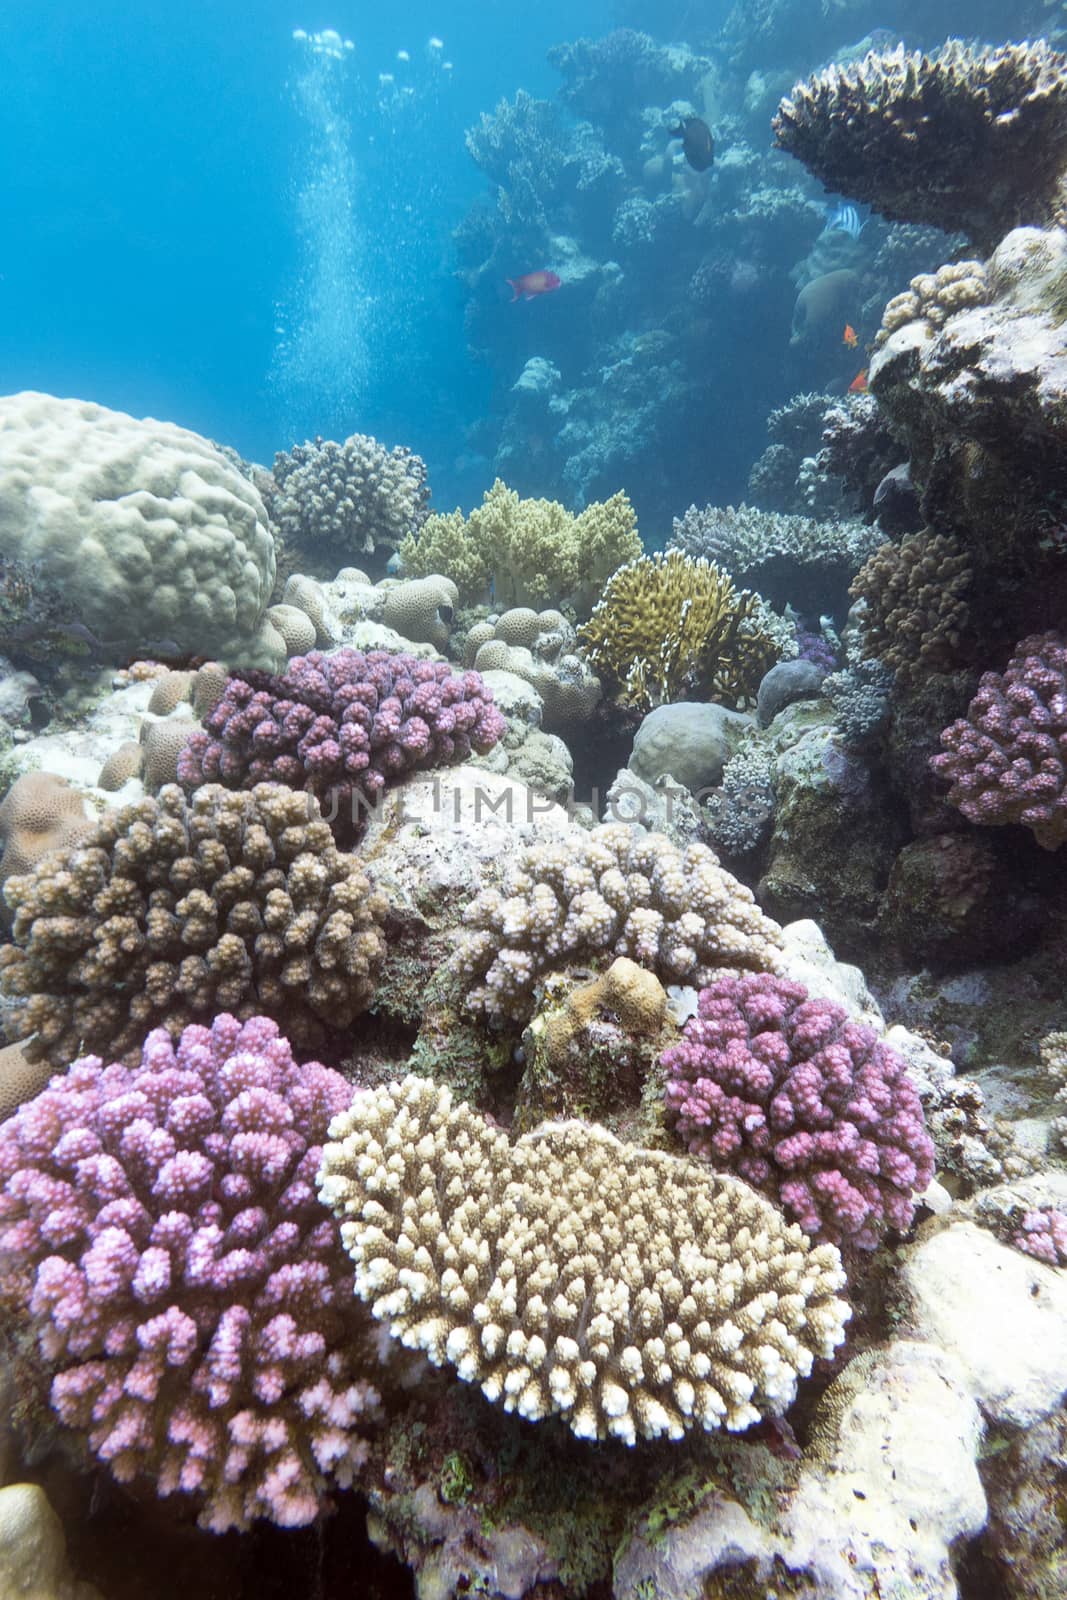 colorful coral reef with hard violet corals on the bottom of tropical  sea